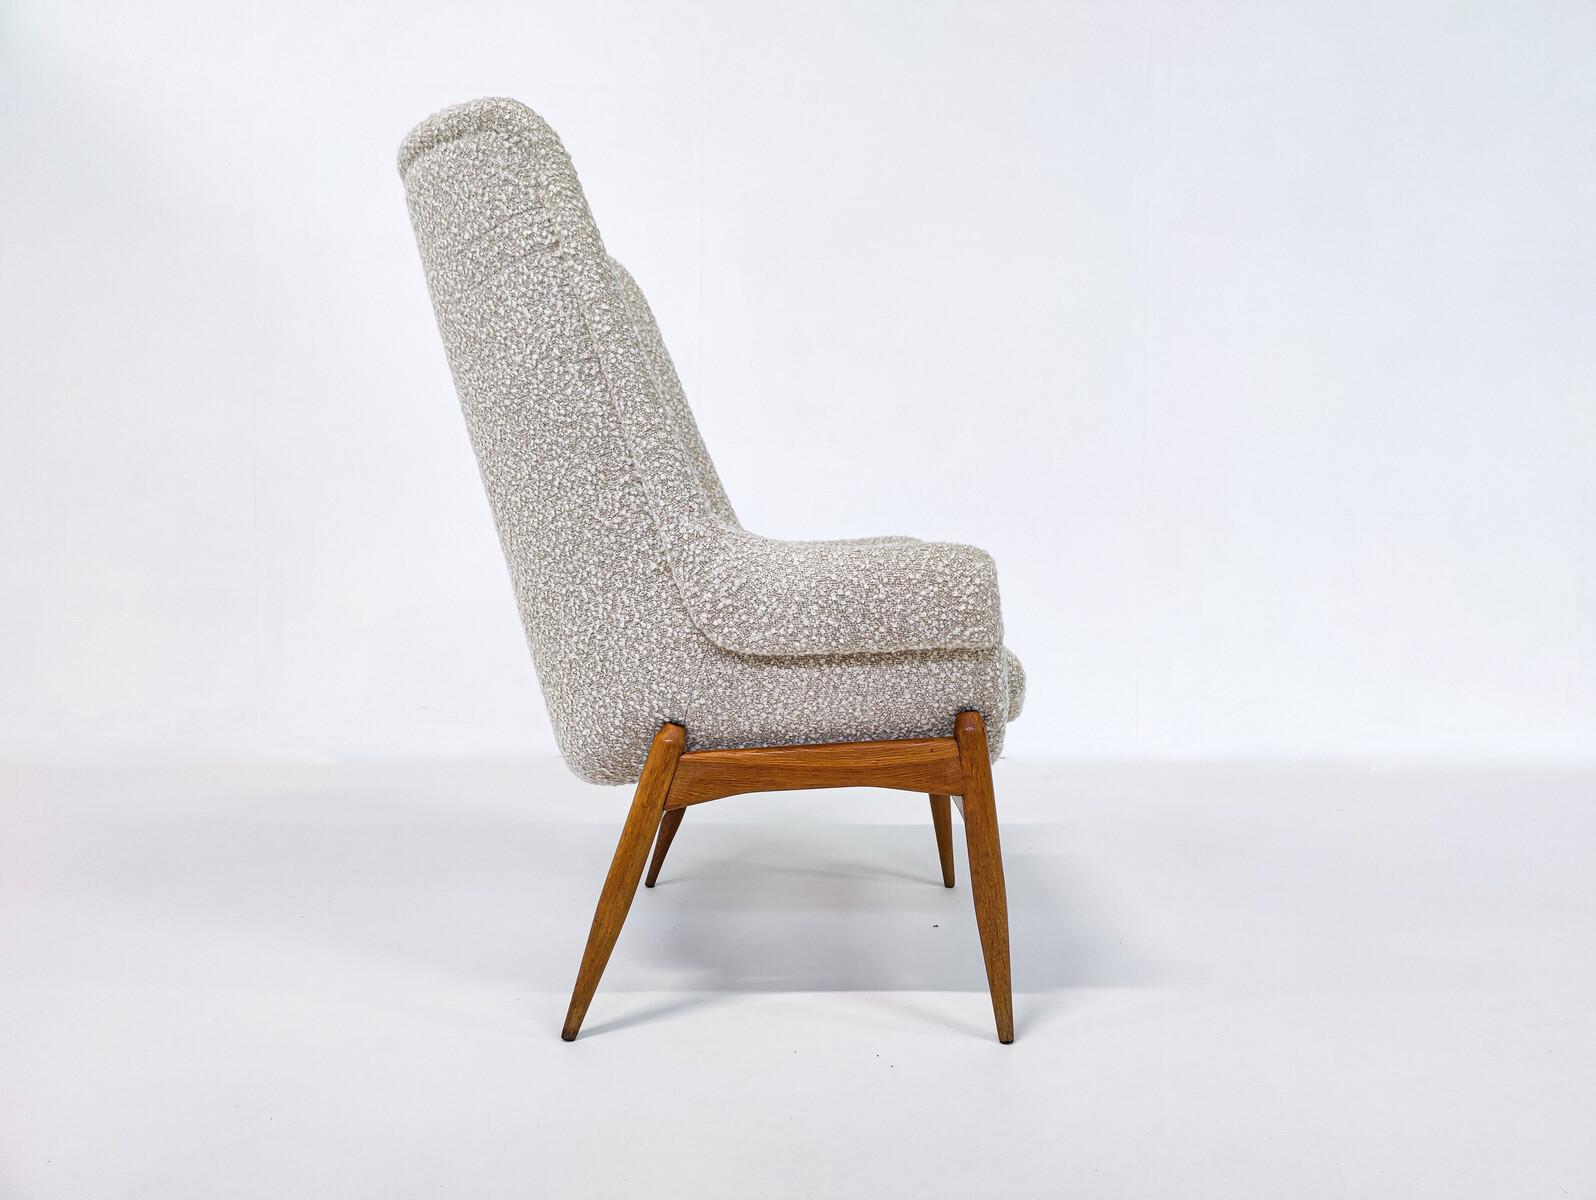 Pair of Mid-Century Modern Beige Fabric Armchairs by Julia Gaubek, Hungary, 1950 For Sale 4